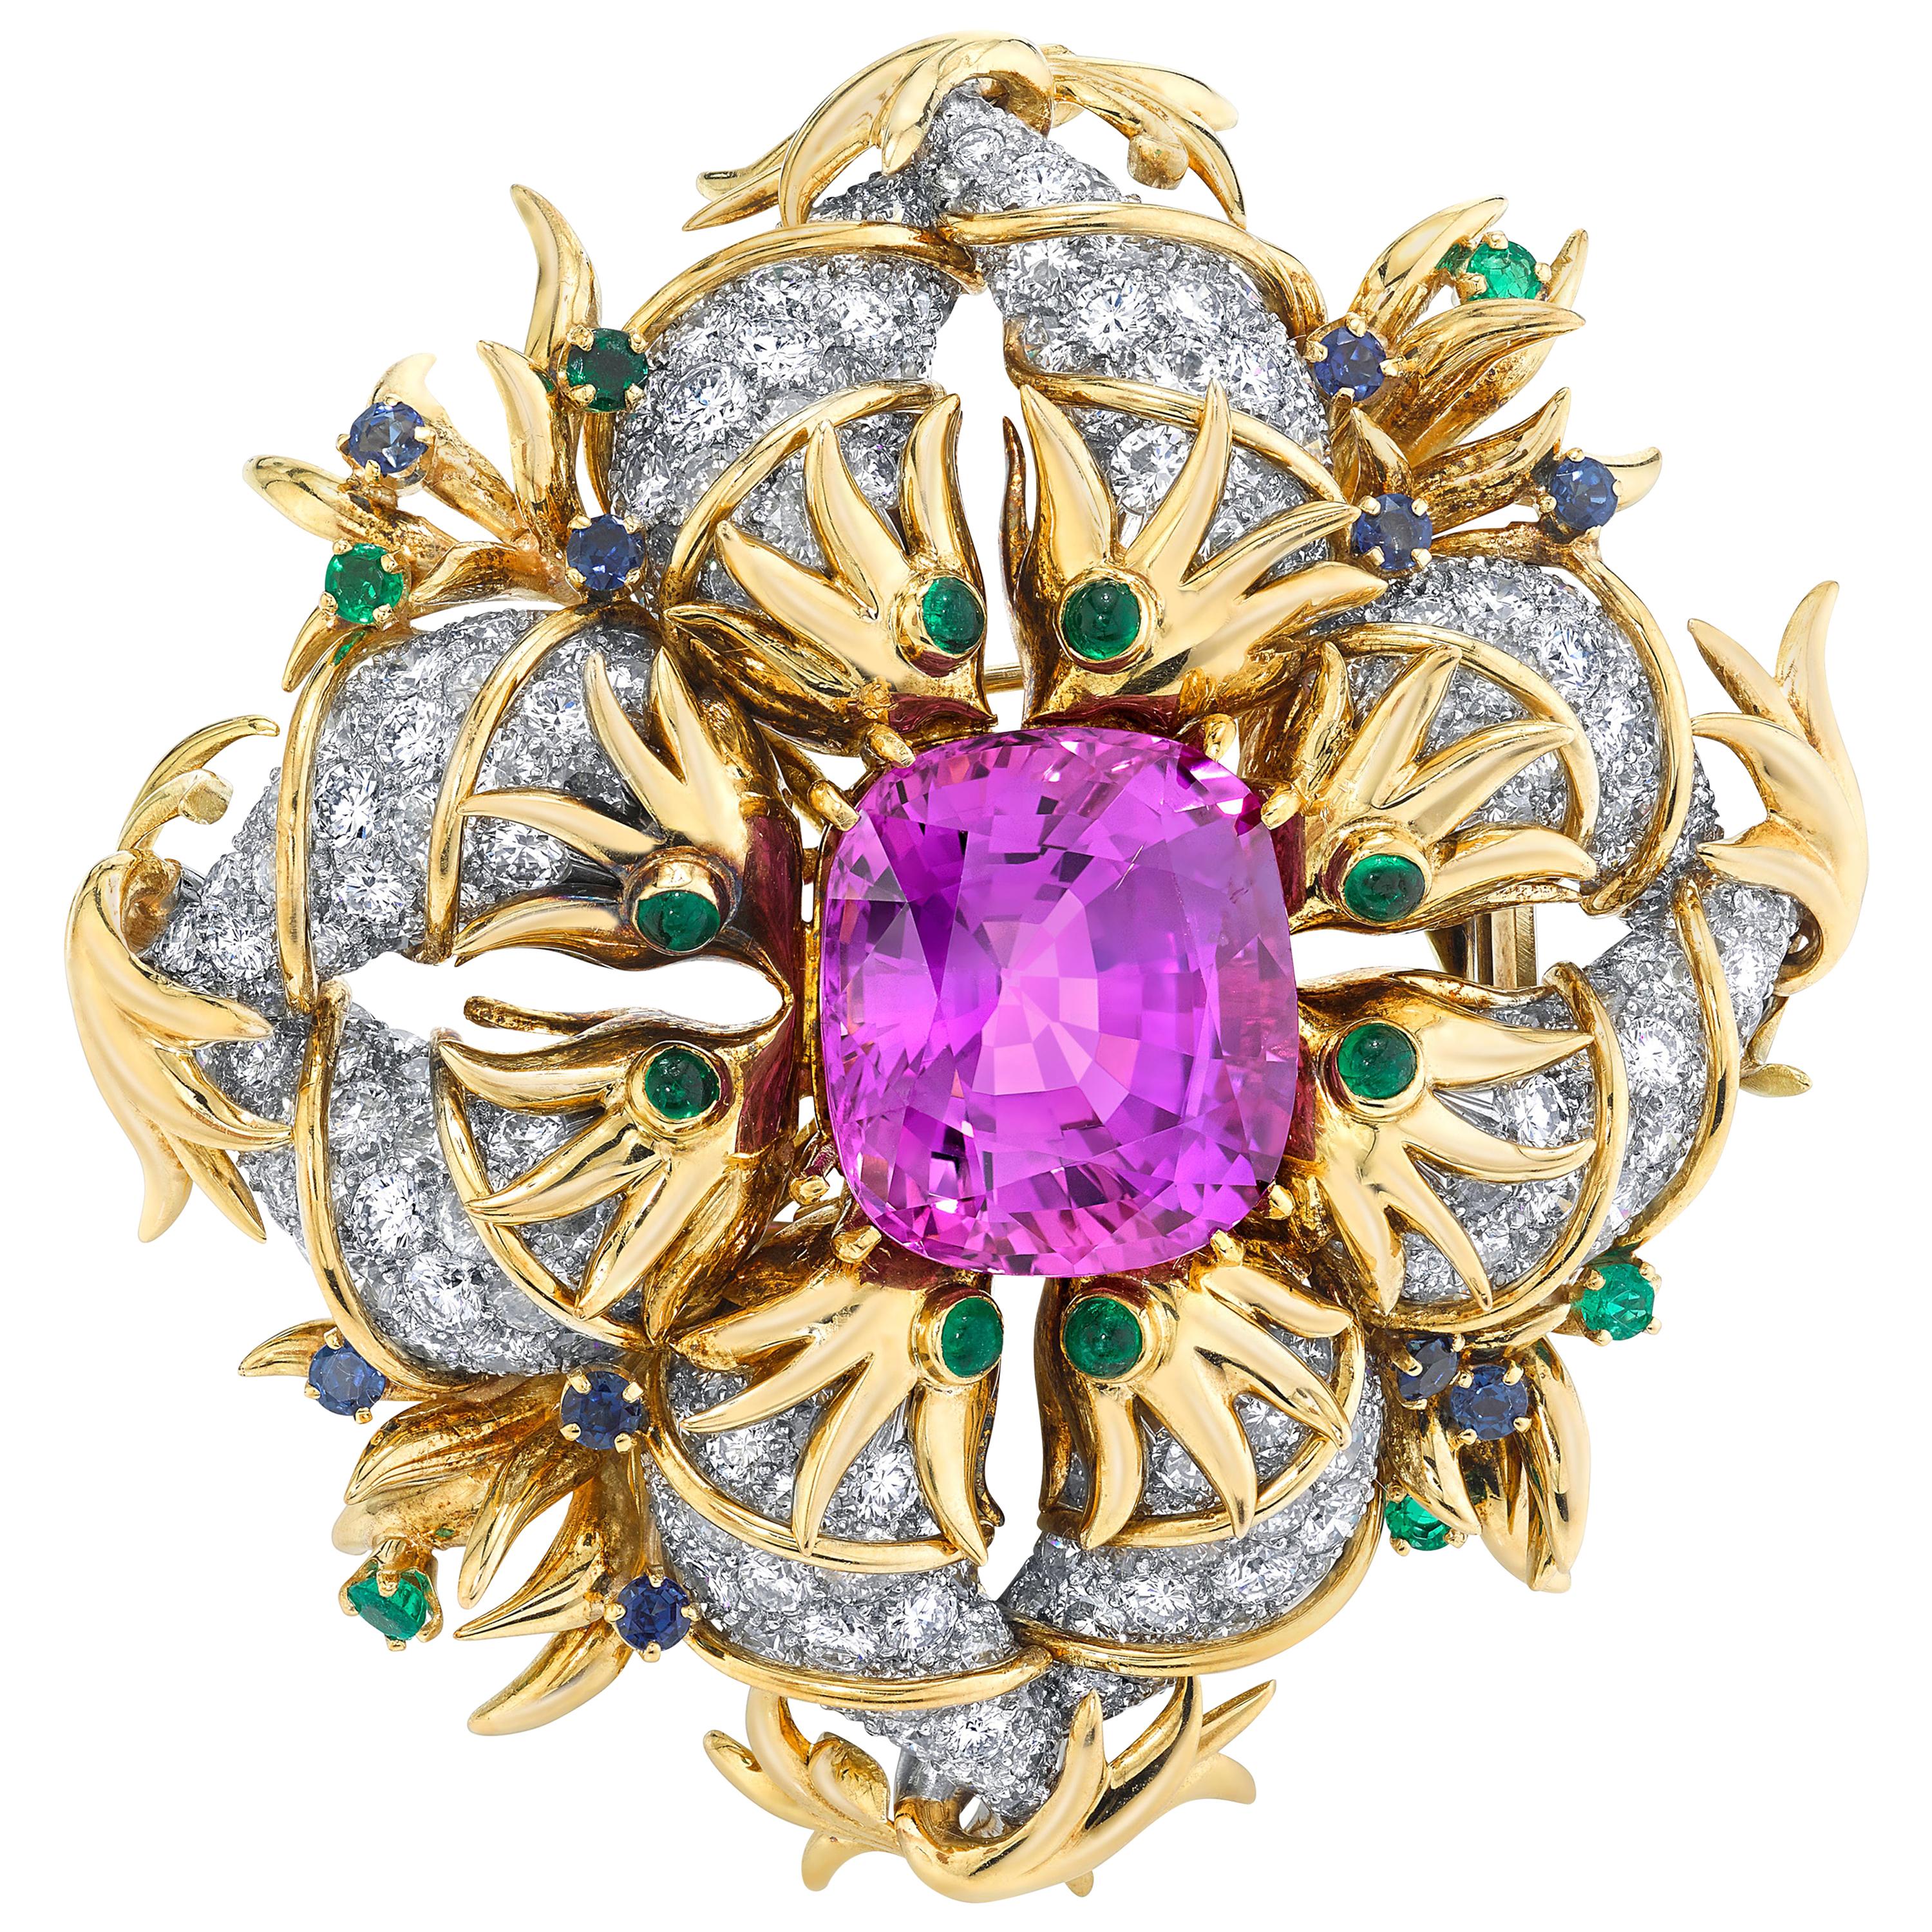 Tiffany & Co. by Sonia Younis, 21.49 Carat Pink Sapphire 18k and Platinum Brooch